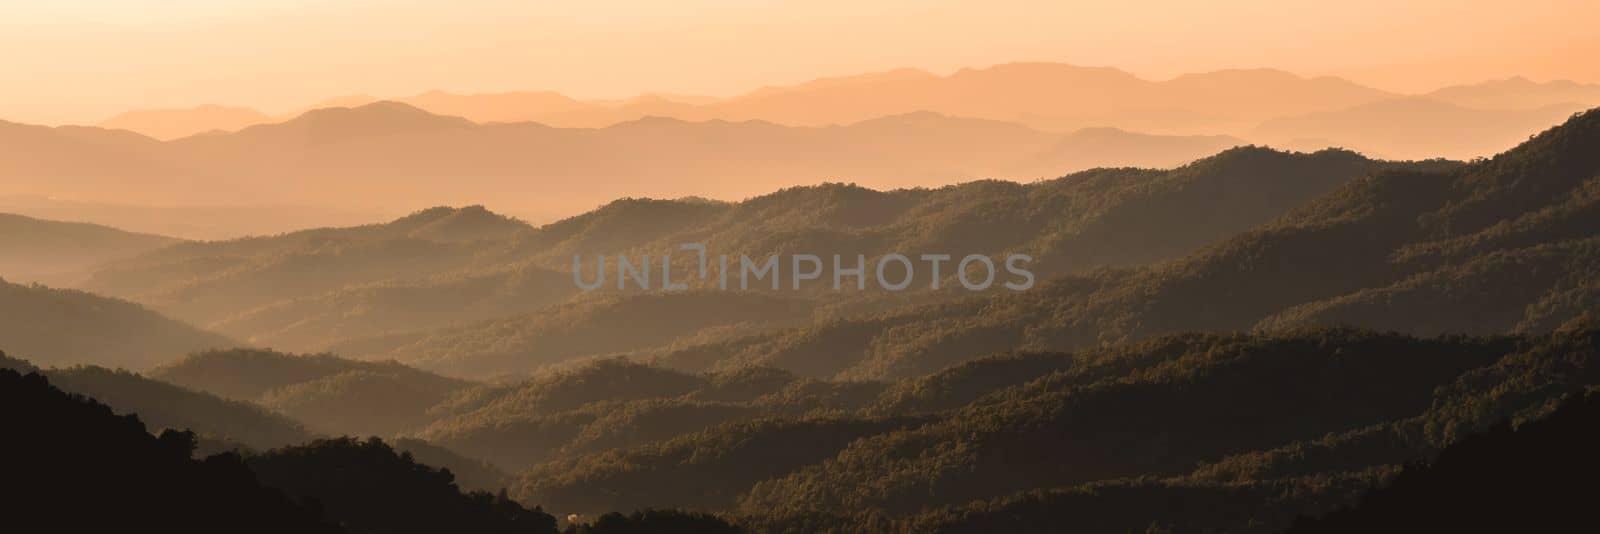 sunset in the mountains of Northern Thailand Chiang Mai. beautiful sunset in the mountains by fokkebok